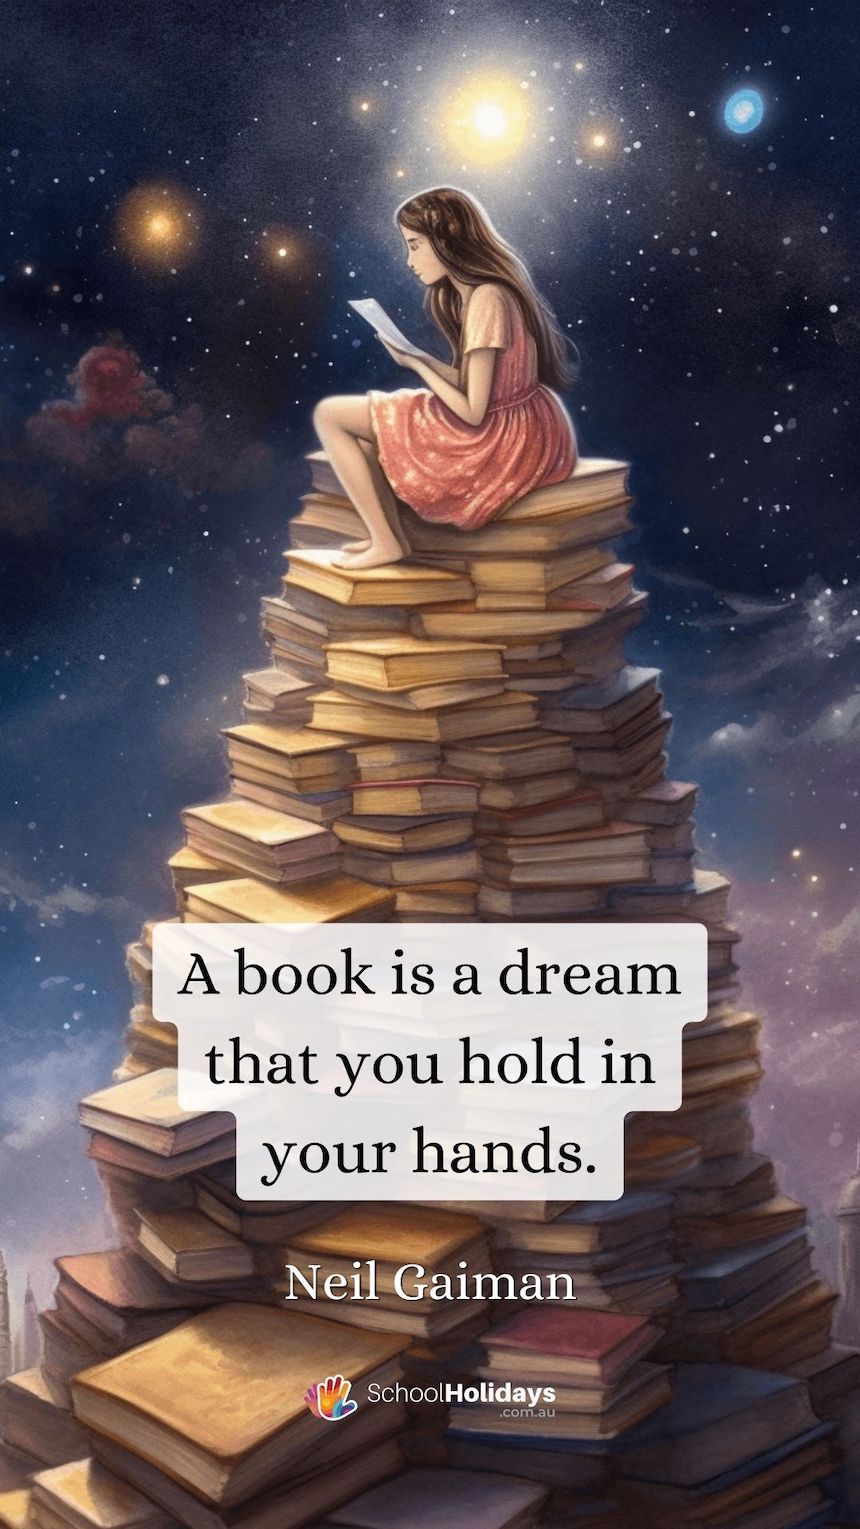 Quotes on my hobby reading books: "A book is a dream that you hold in your hands." - Neil Gaiman.